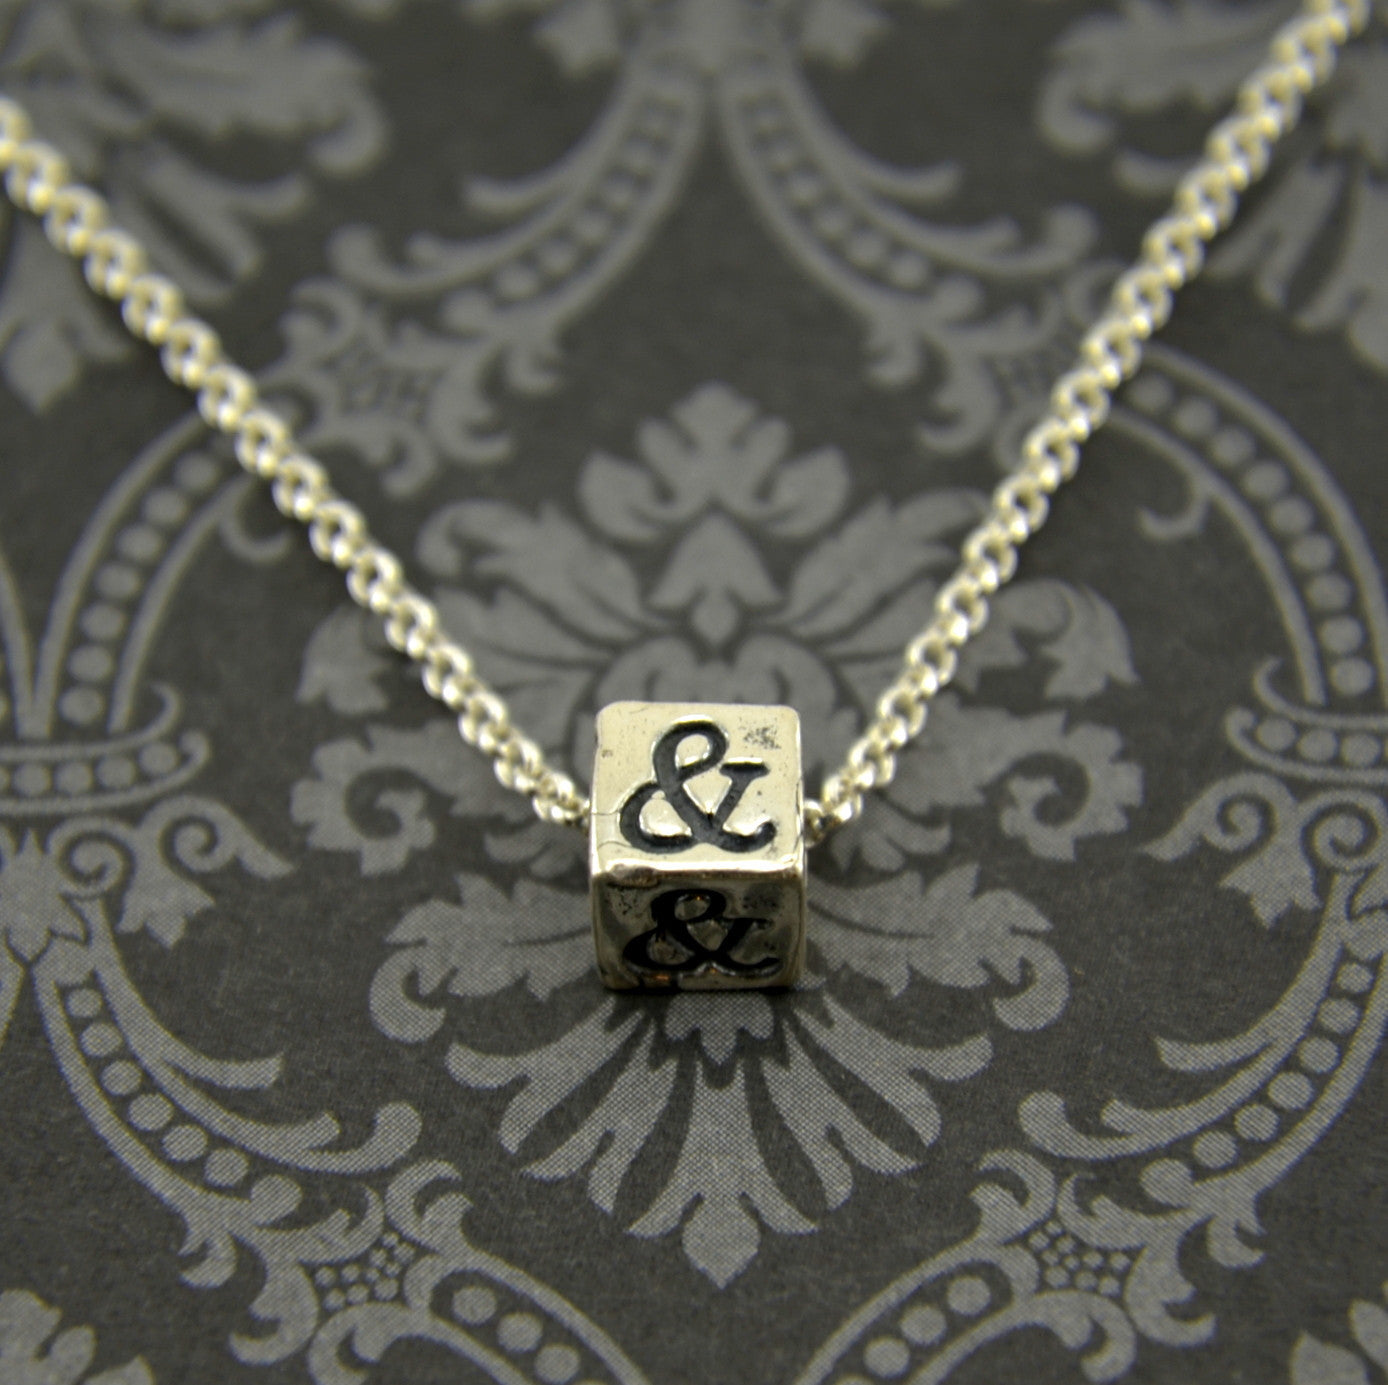 Ampersand Necklace - Gwen Delicious Jewelry Designs